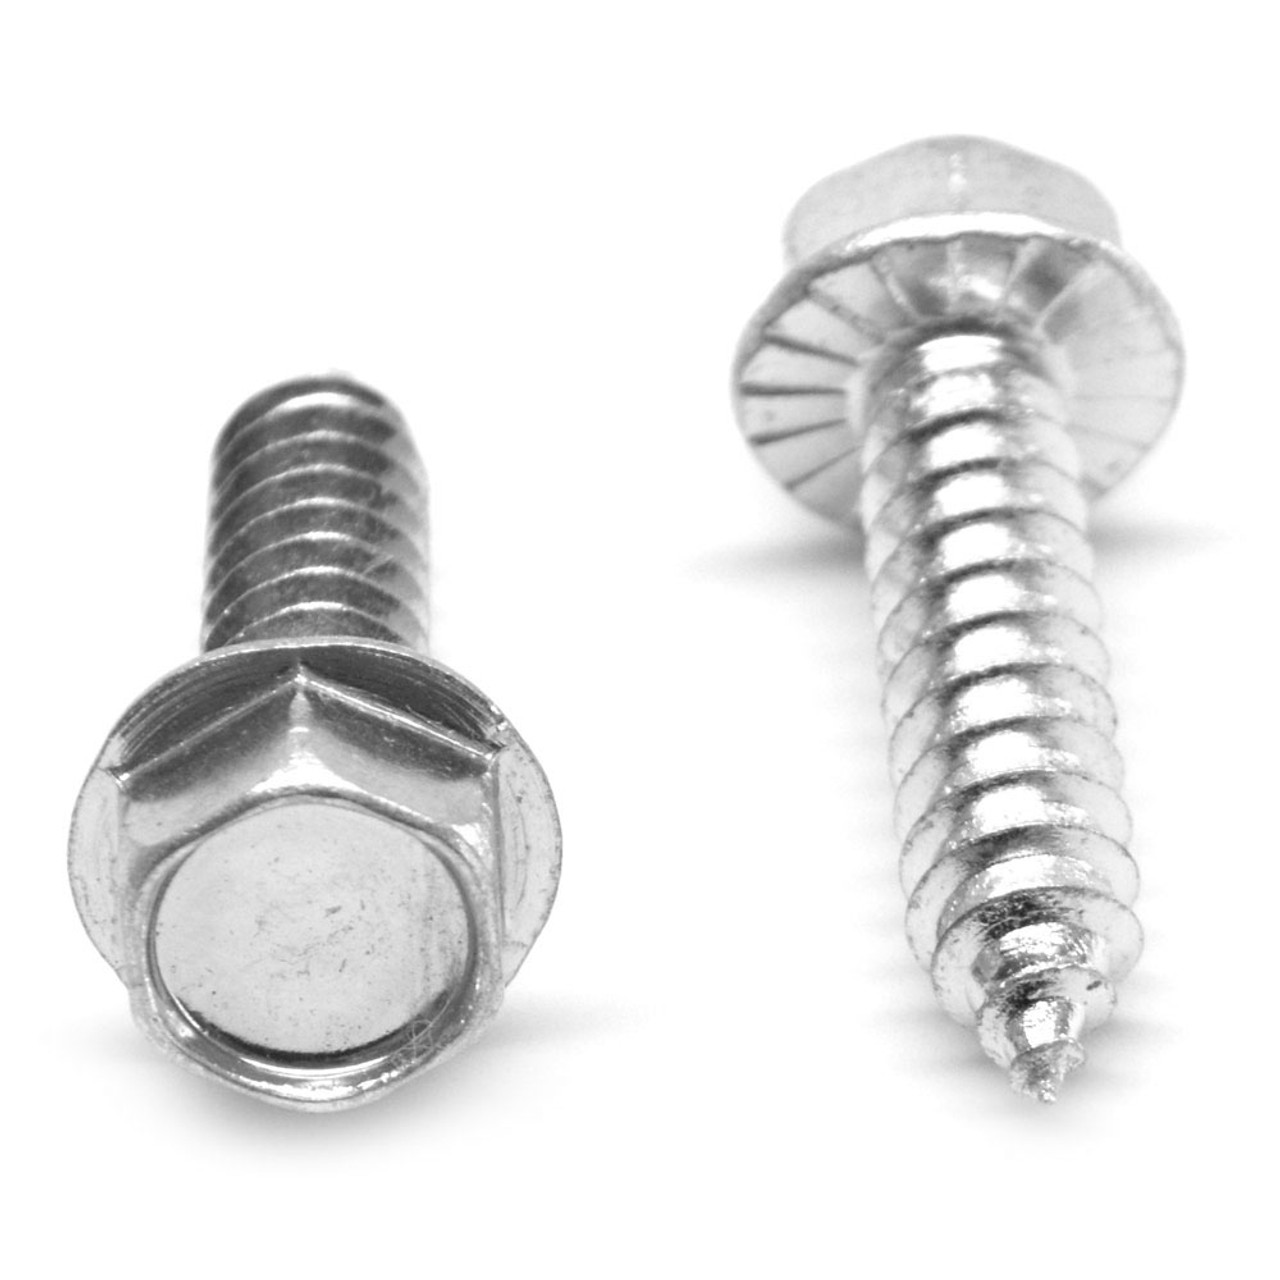 1/4-14 x 3/4 Sheet Metal Screw Hex Washer 7/16 AF Head with Serration Type AB Low Carbon Steel Zinc Plated